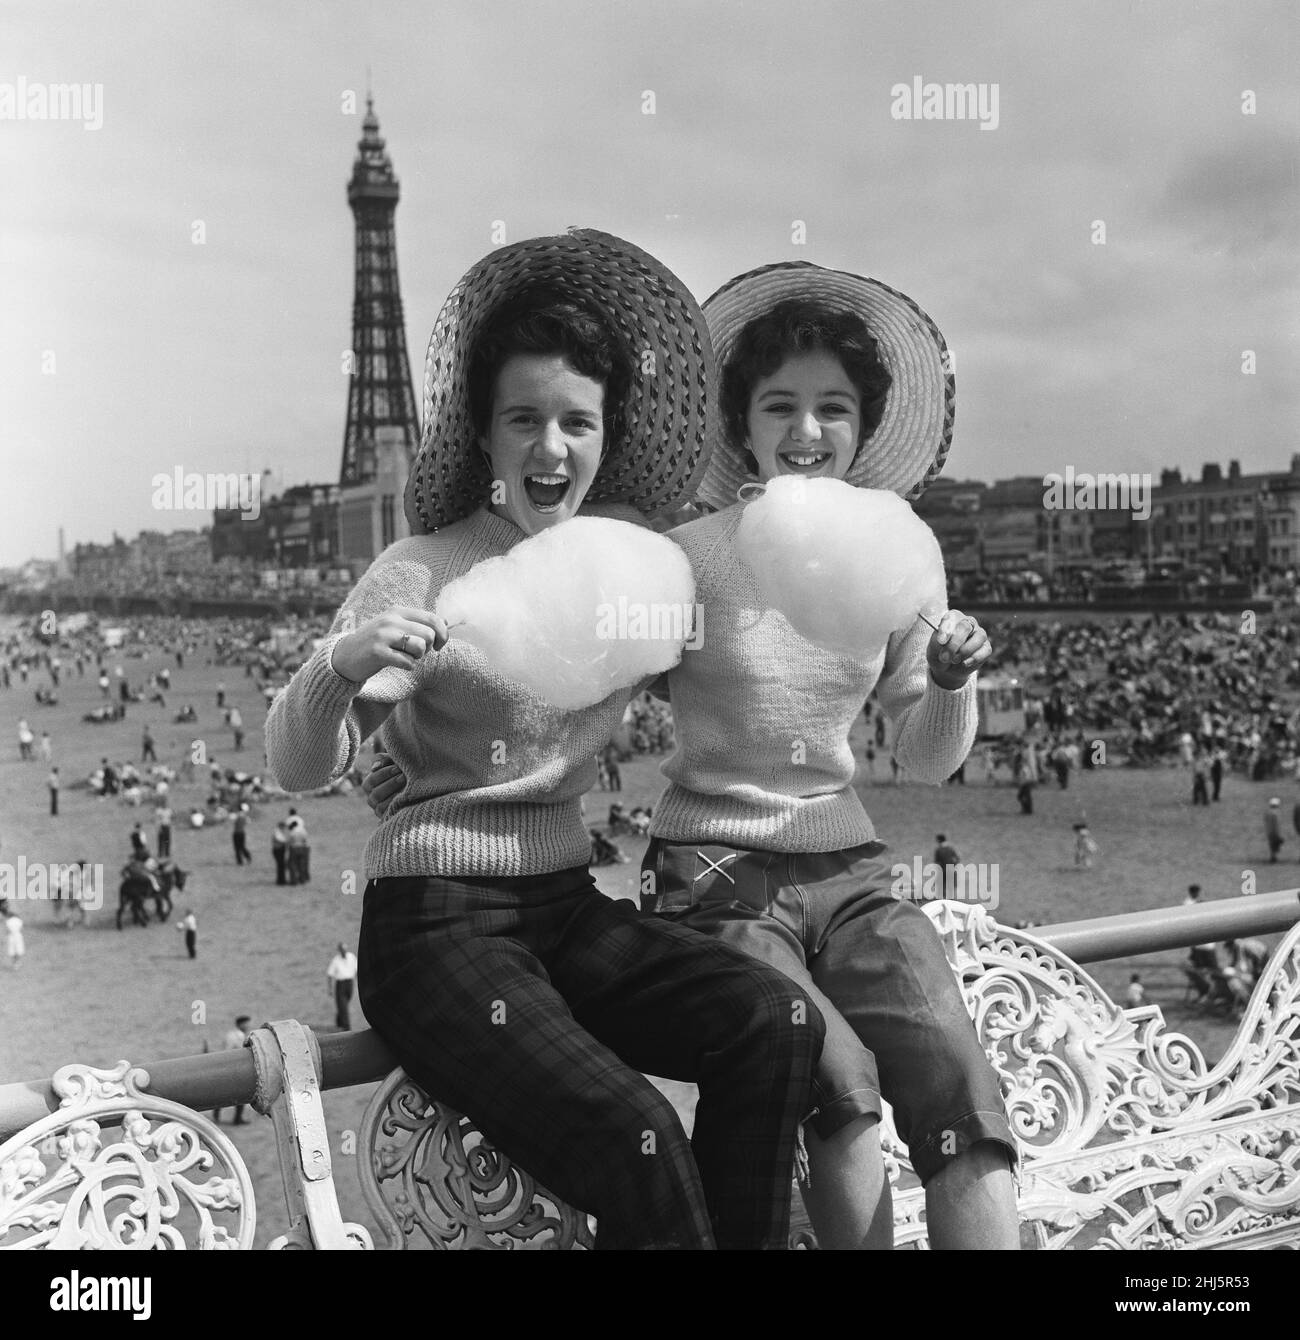 Jean Clark and Mary Cuppler enjoy eating candy floss on the pier at Blackpool, Lancashire. 18th July 1957. Stock Photo